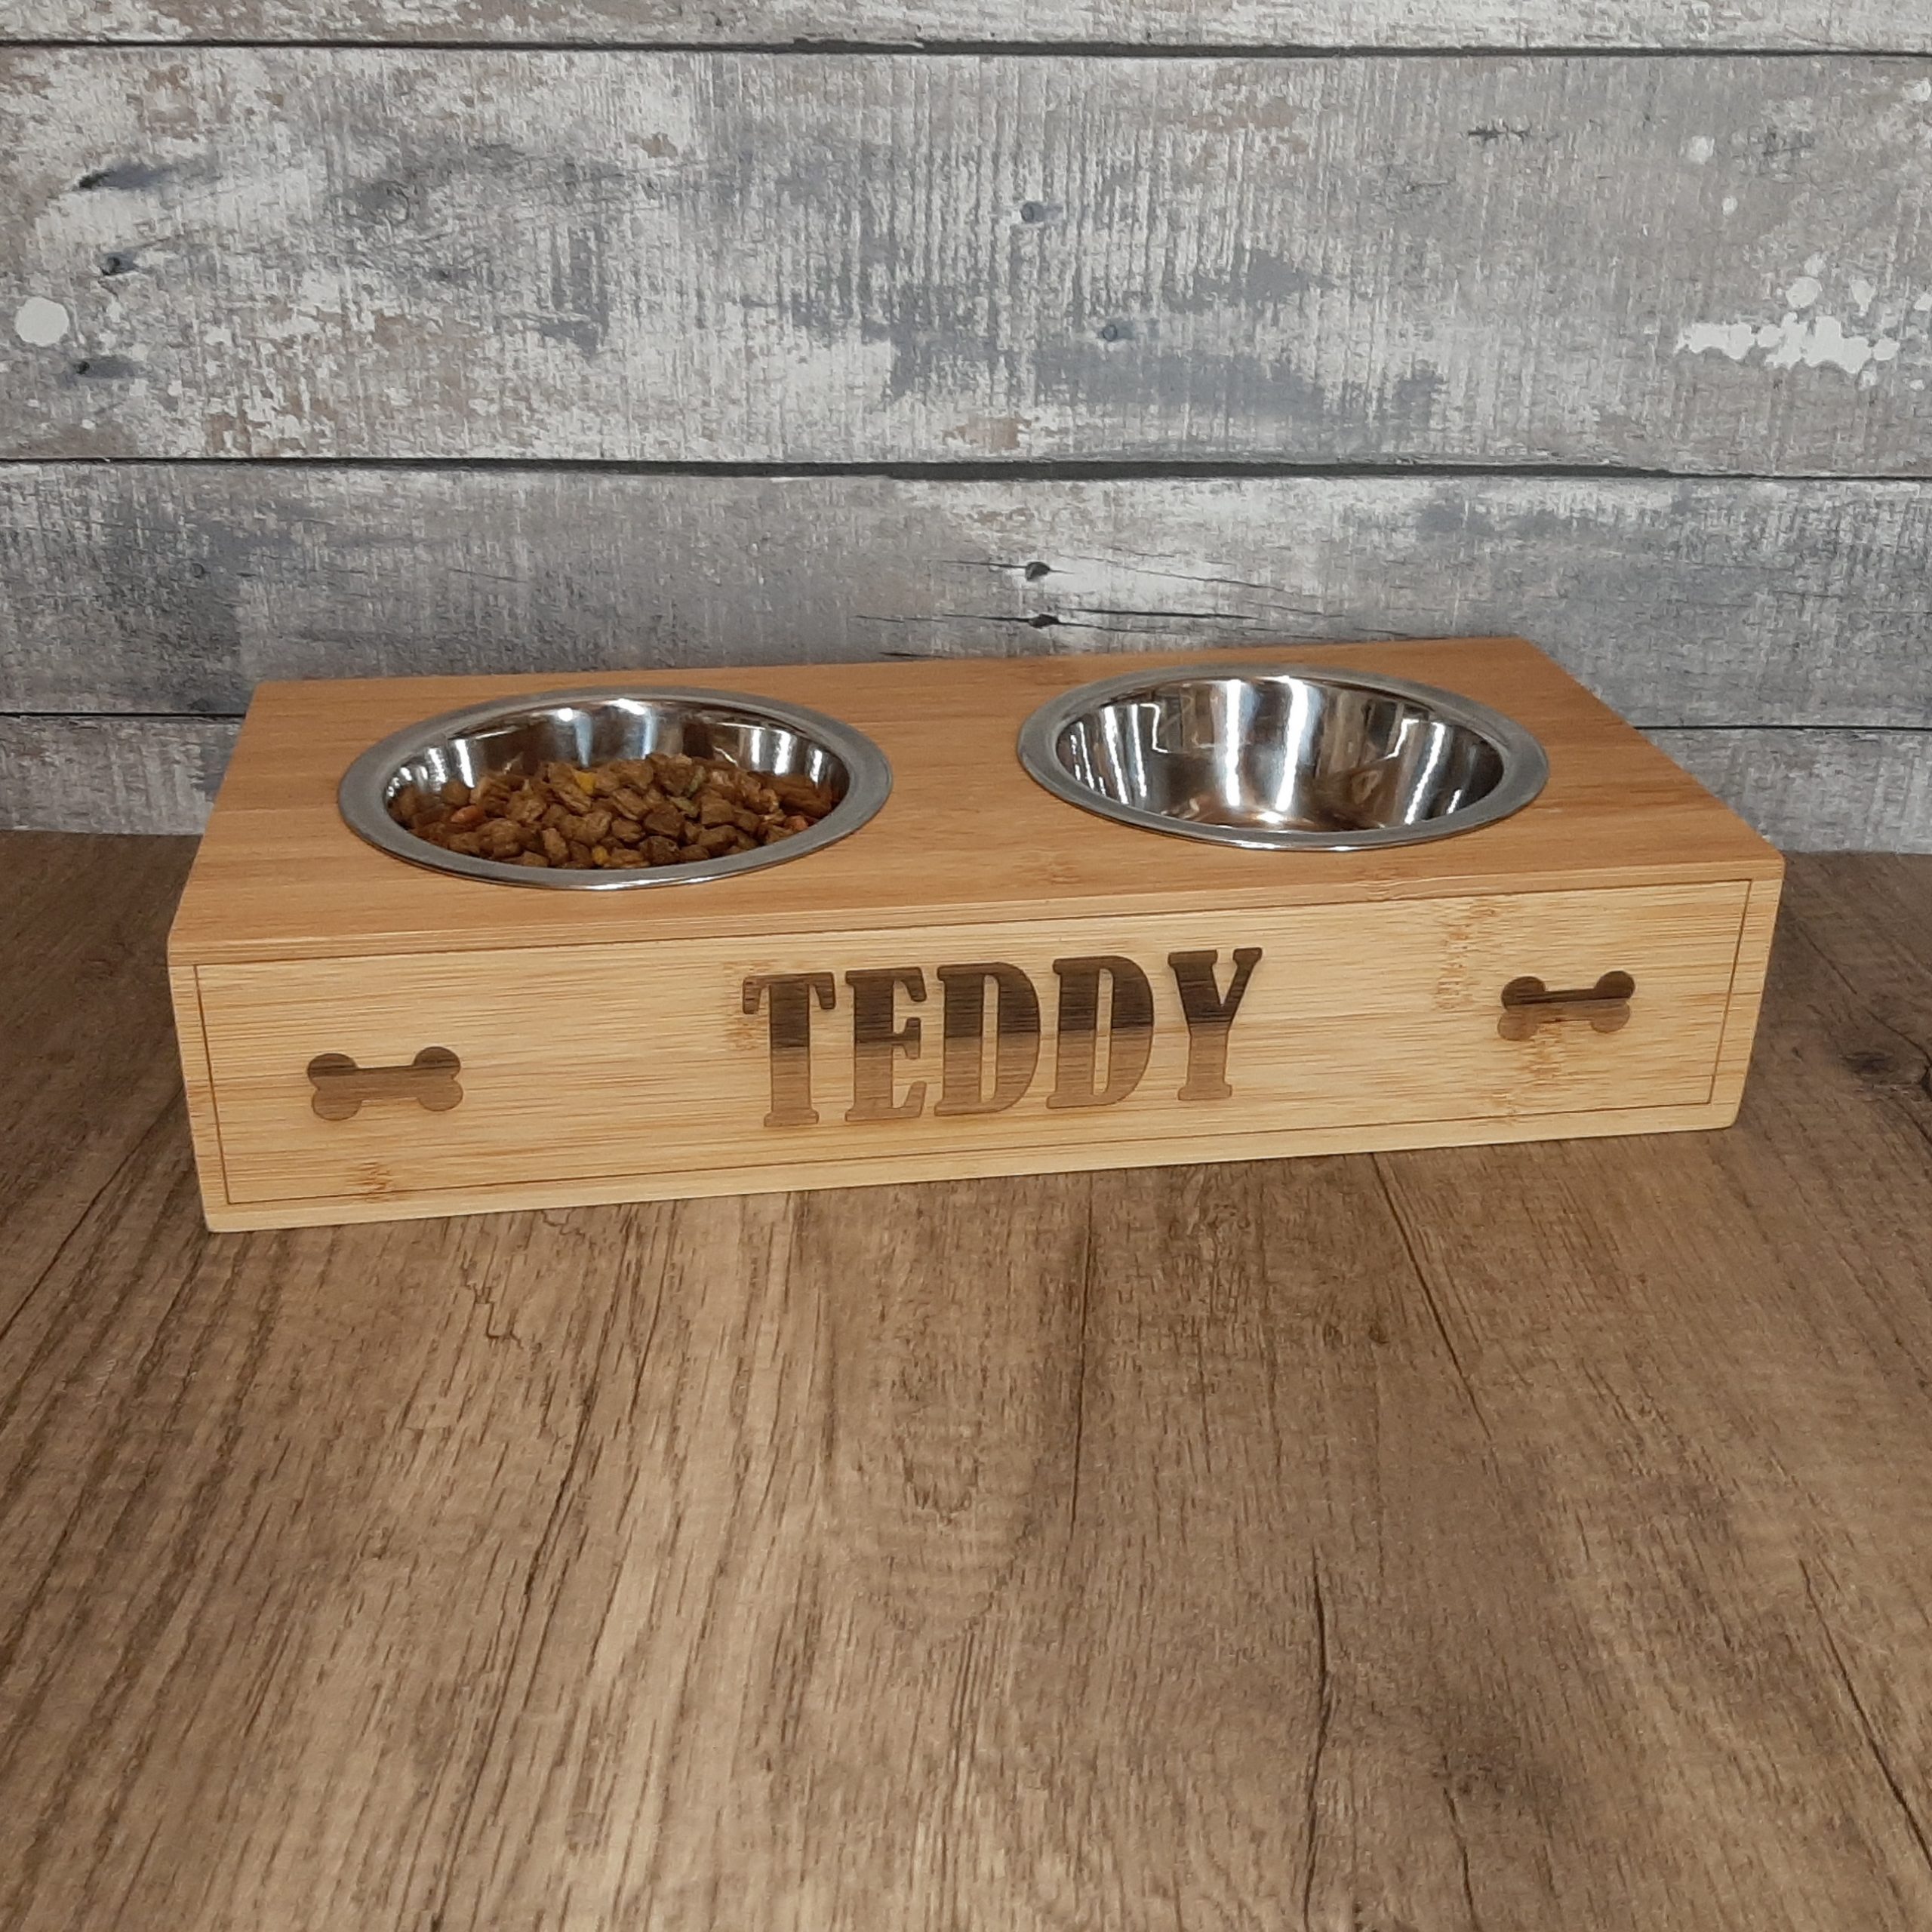 Wooden Pet Bowl Riser feeding stand for dogs with personalised name and bones design filled with food